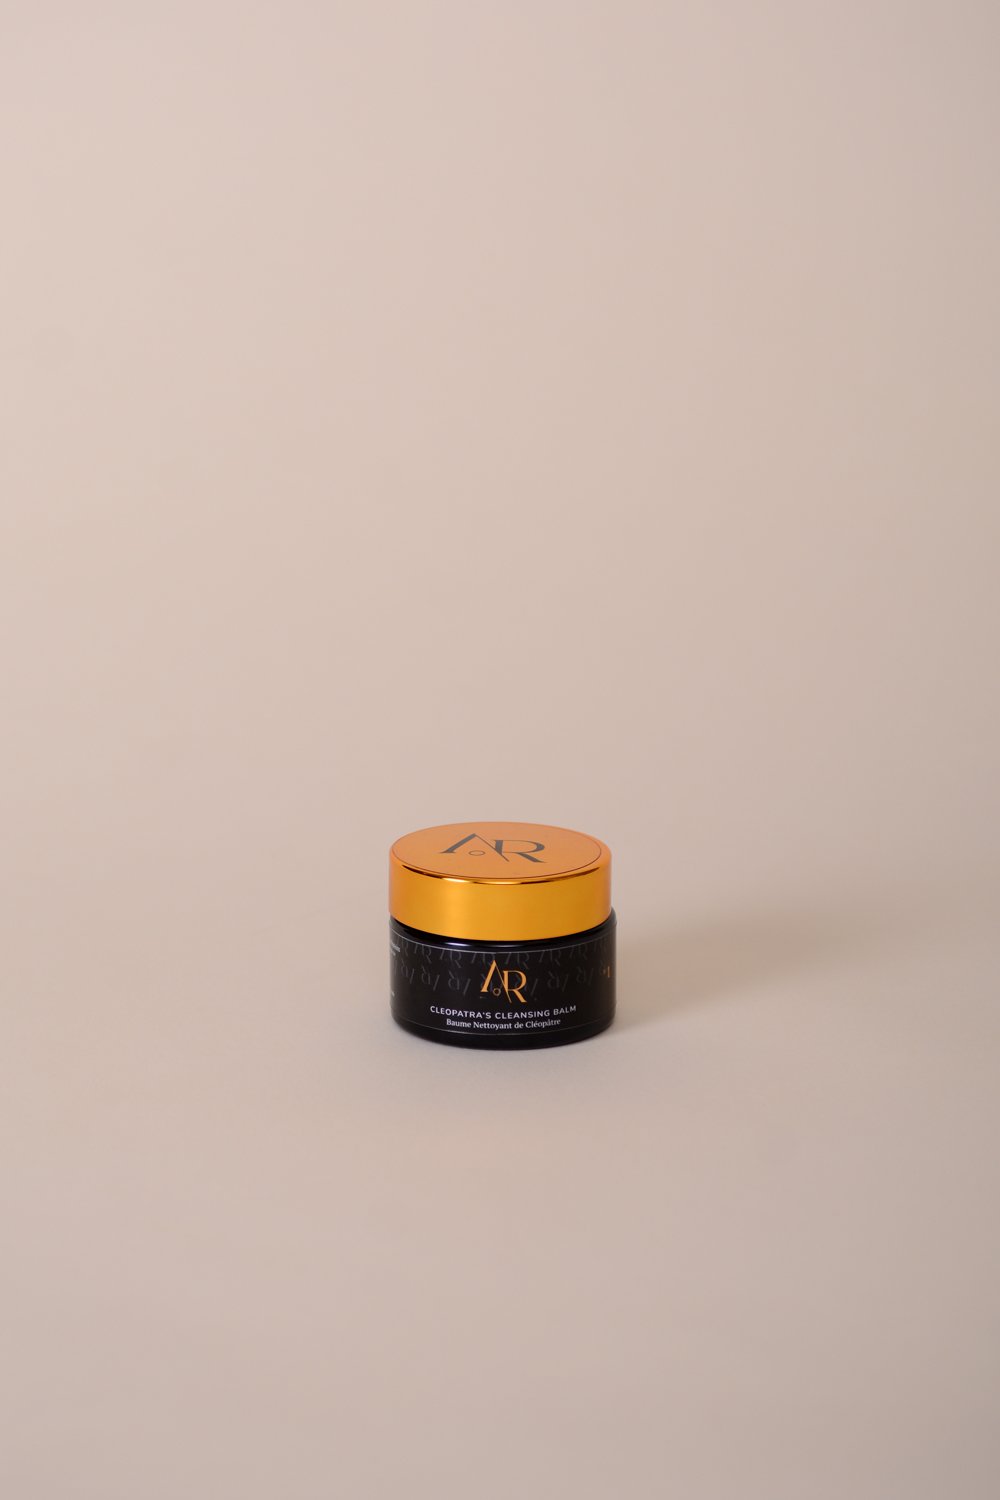 Cleopatra's Cleansing Balm